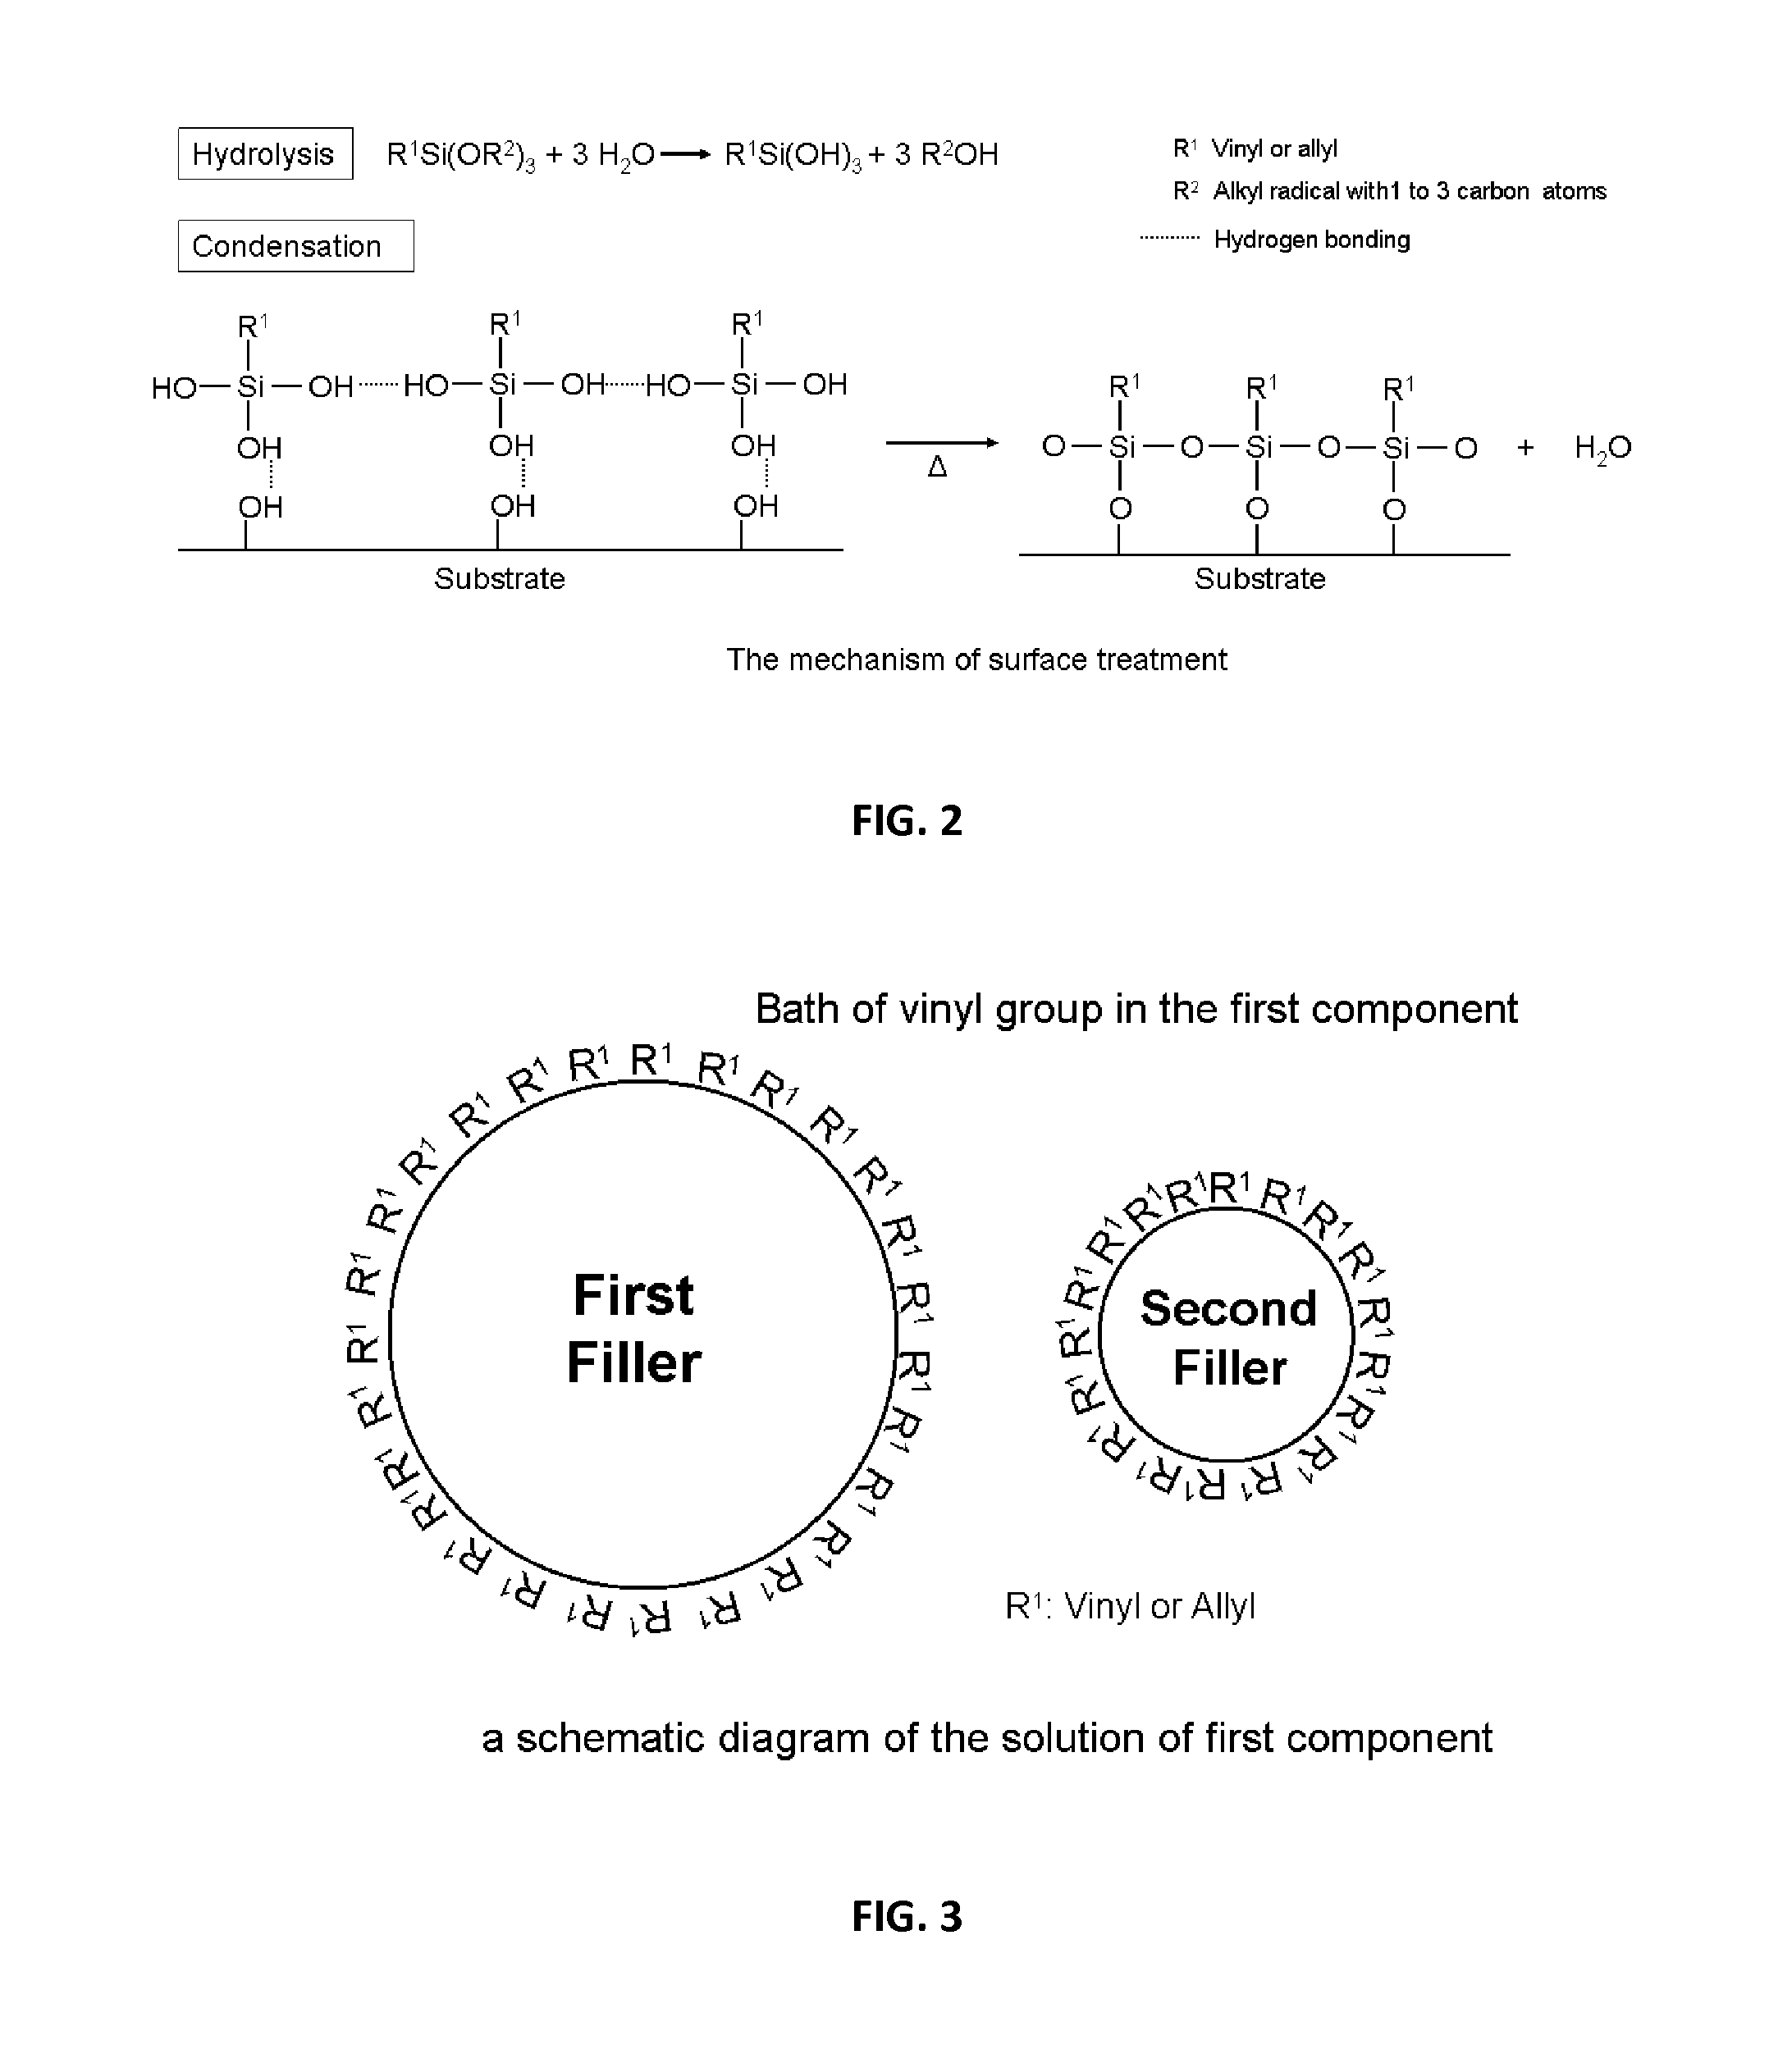 Silicone composition and devices incorporating same